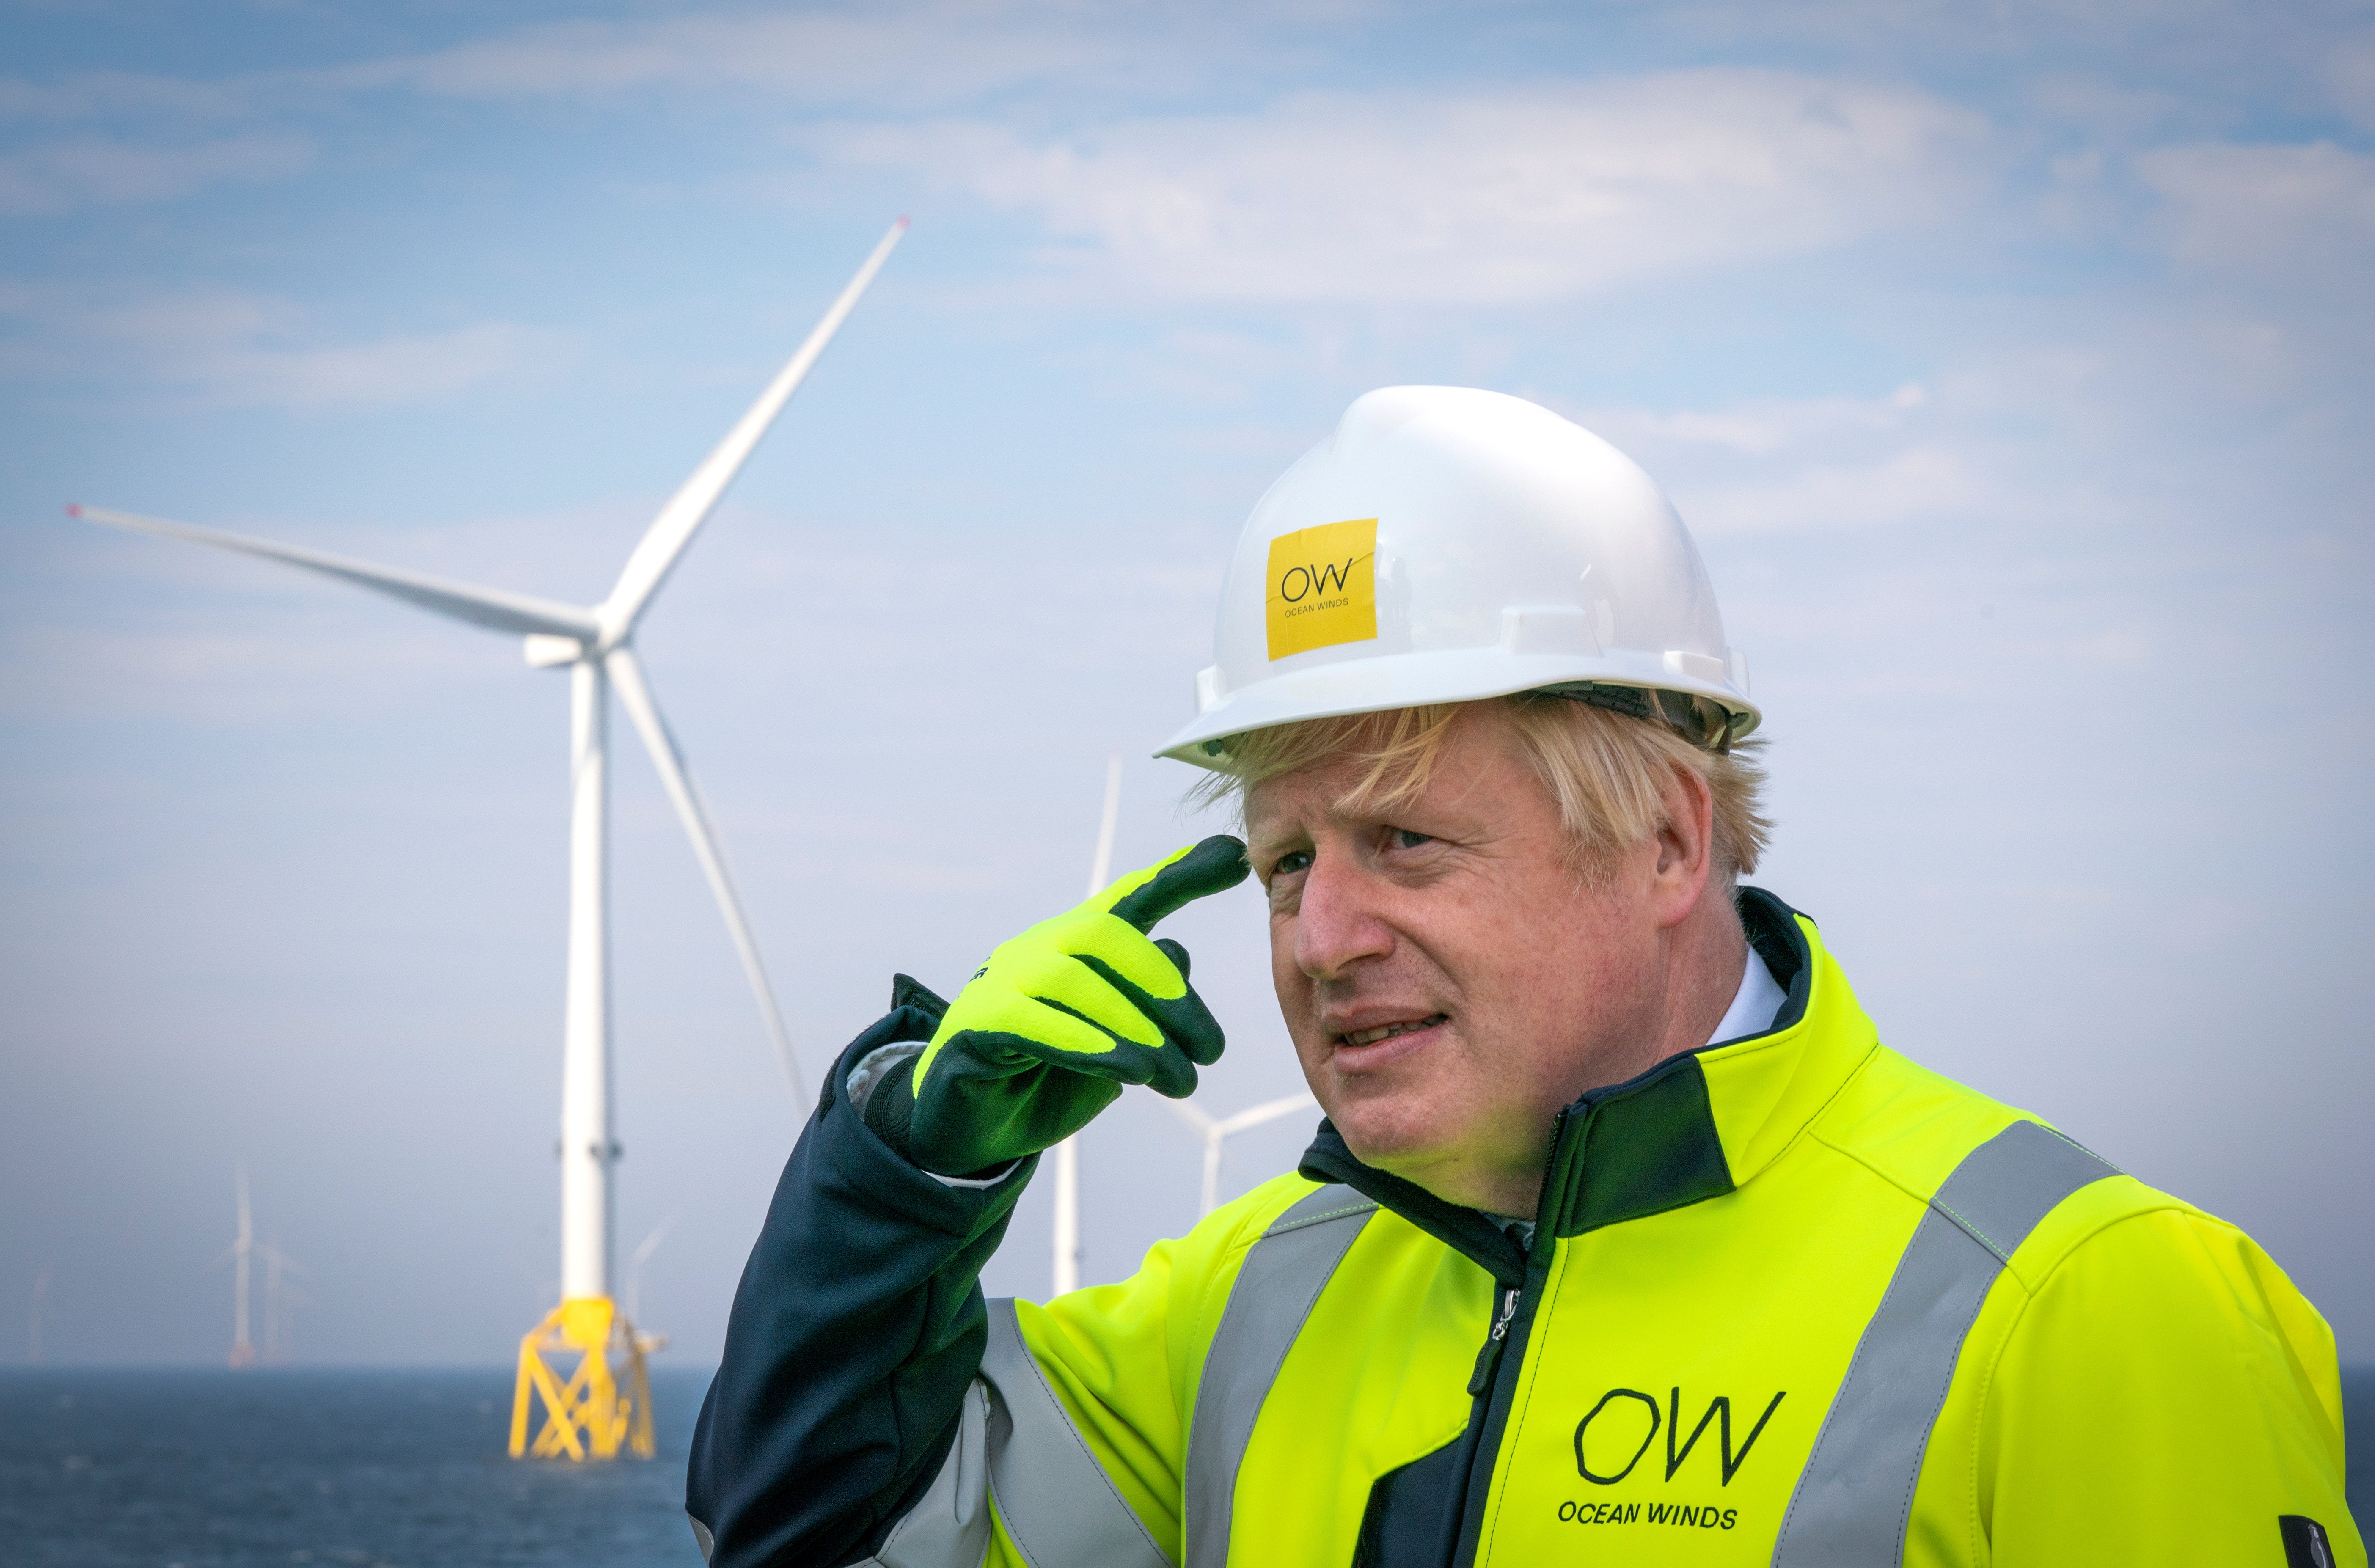 Boris Johnson said “we can’t just tear up contracts'” when asked about the Cambo oilfield